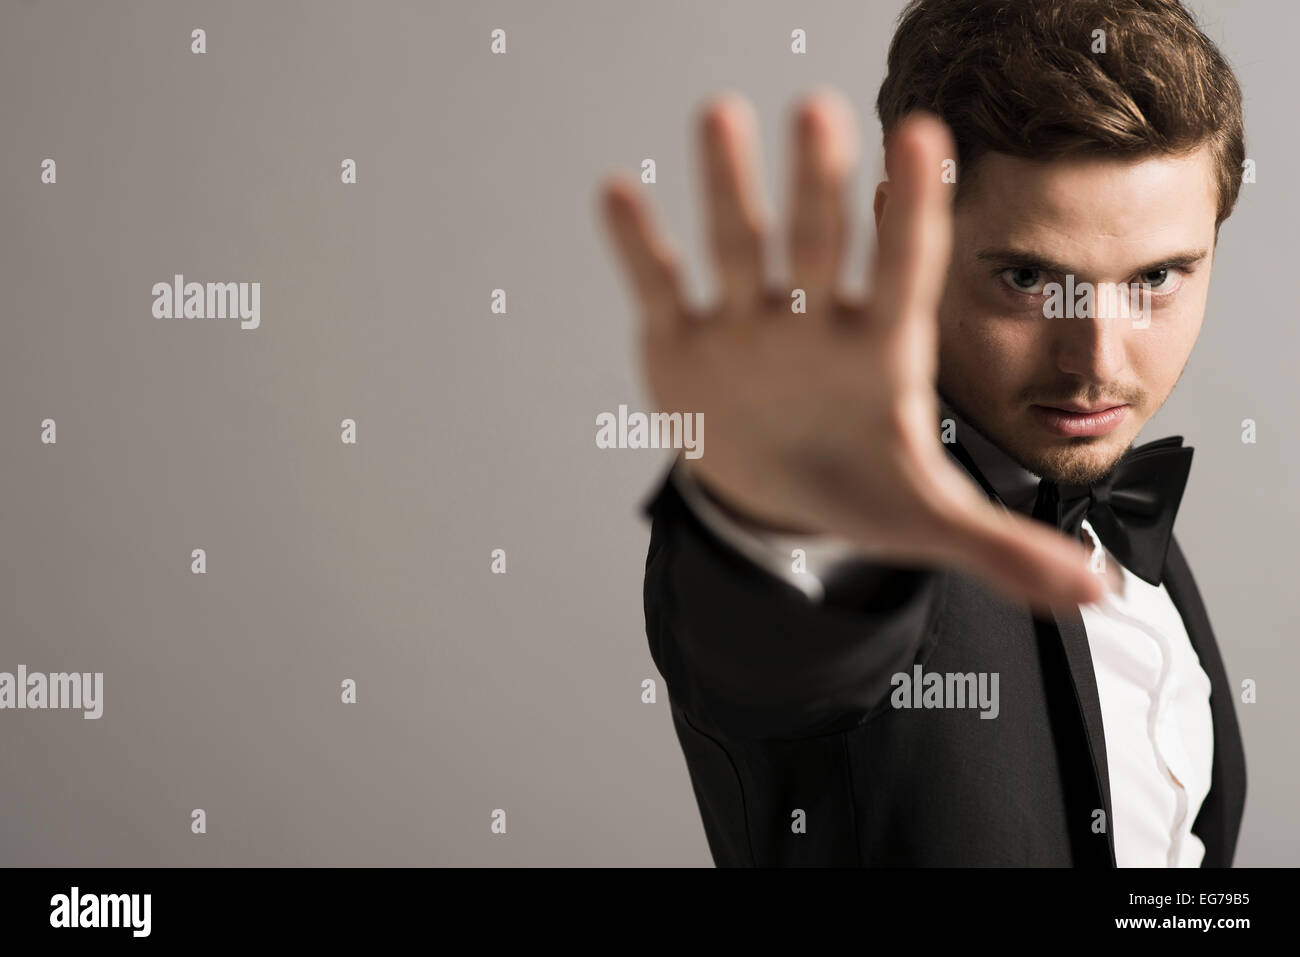 Man wearing tuxedo in front of grey background showing Stop gesture Stock Photo